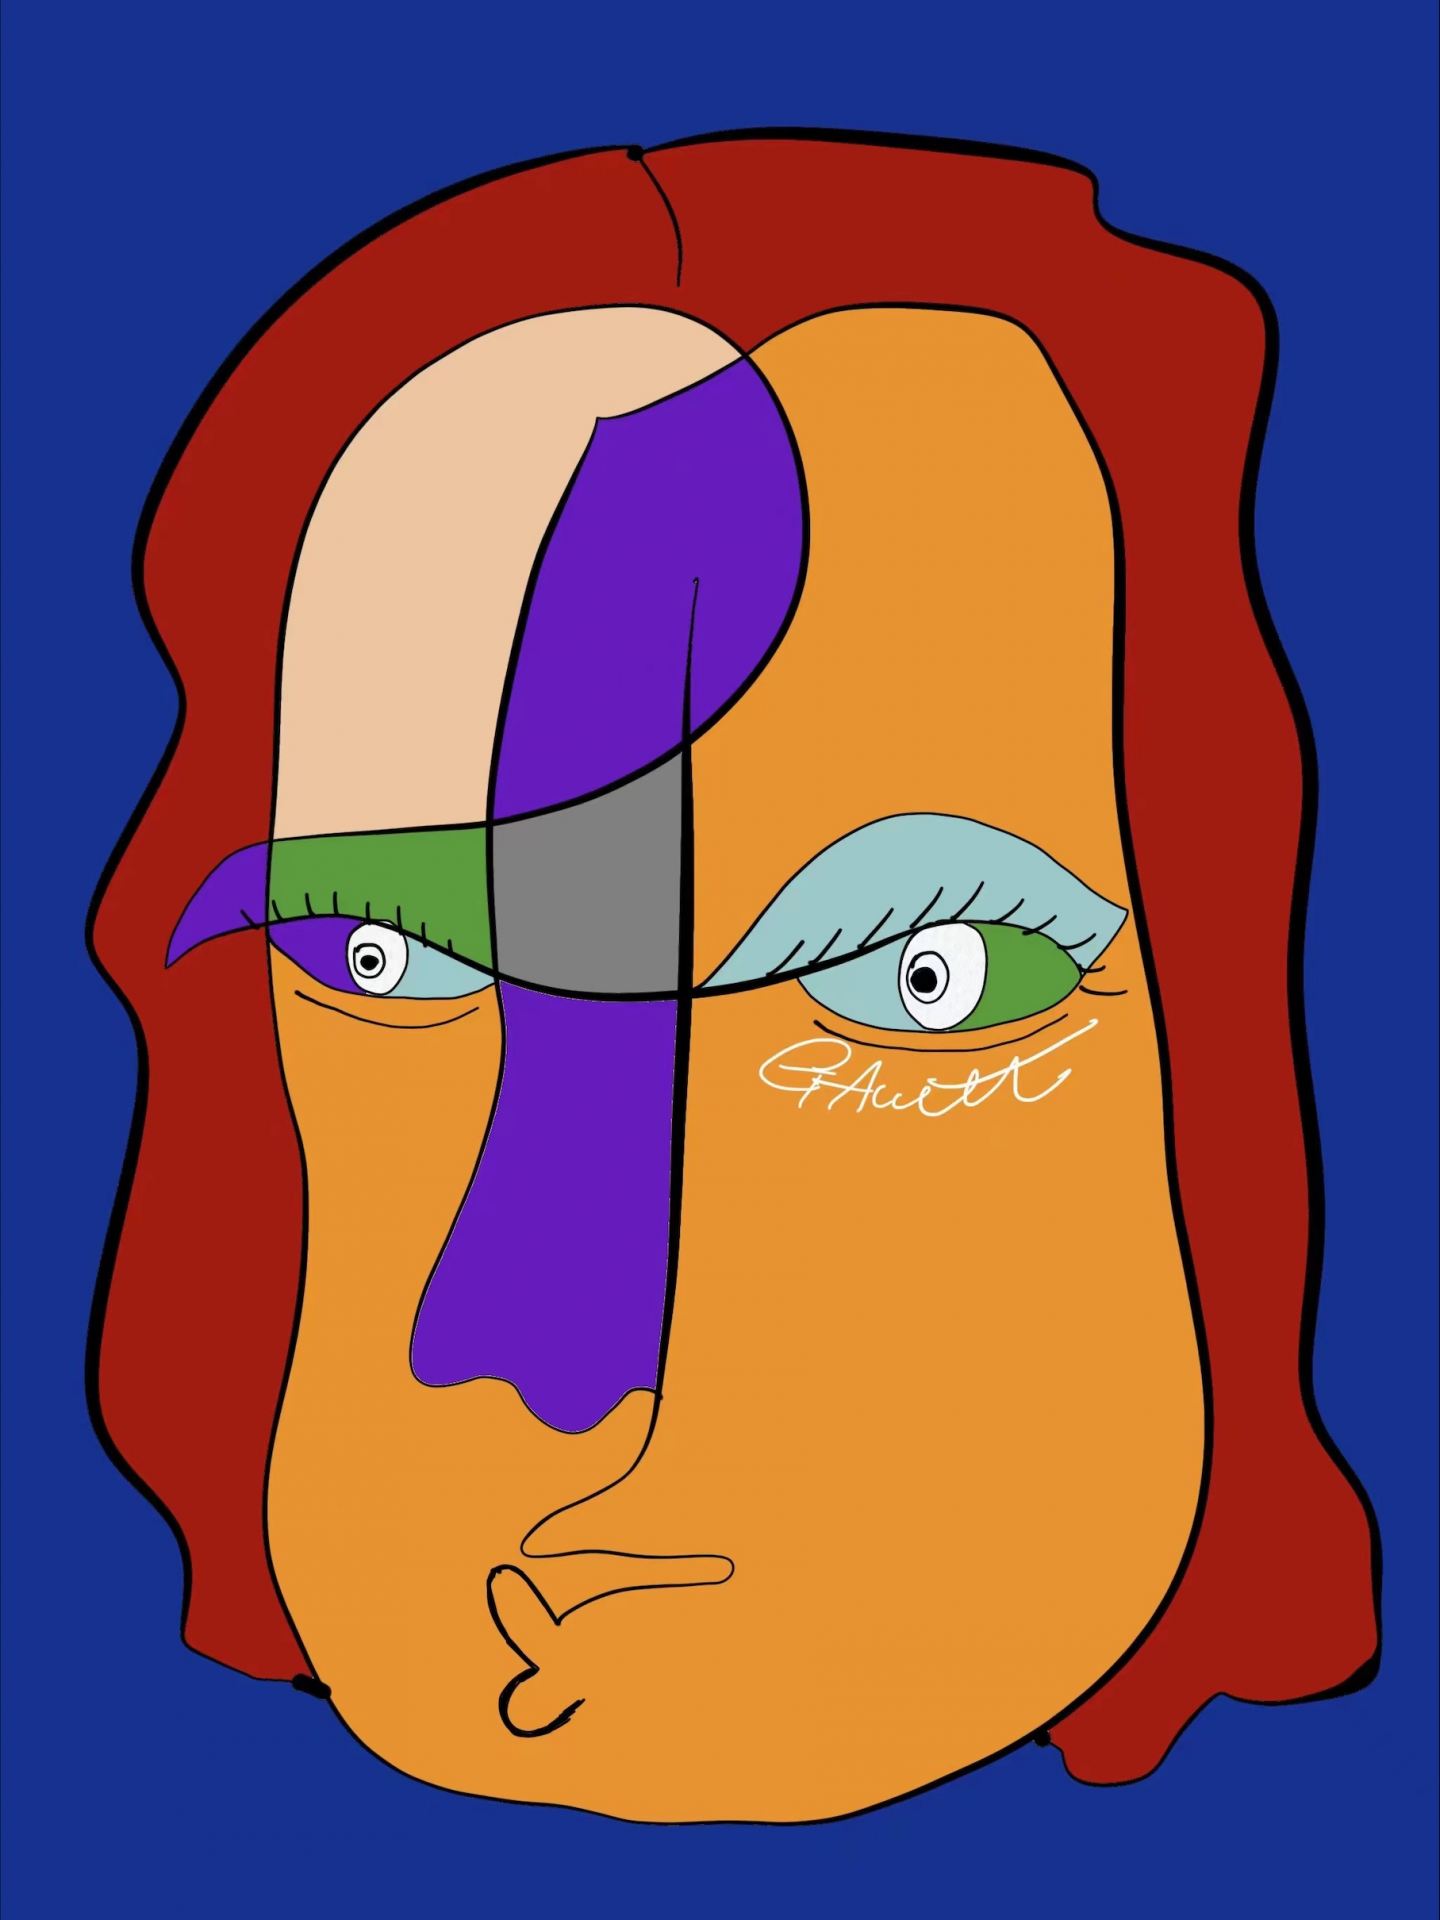 A digital painting of an abstract face.